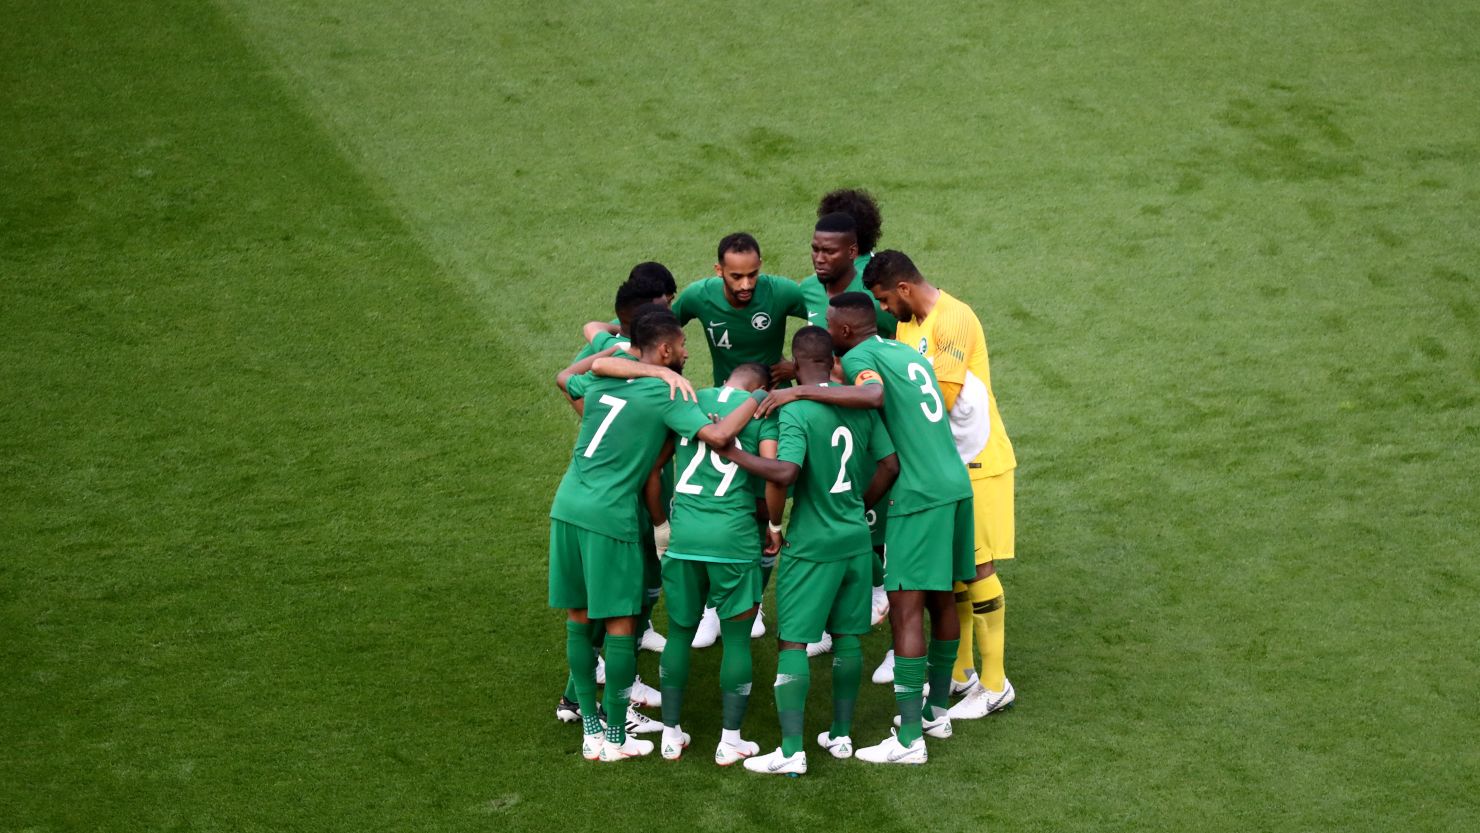 LEVERKUSEN, GERMANY - JUNE 08: The team of Saudi Arabia comes together prior to the International friendly match between Germany and Saudi Arabia at BayArena on June 8, 2018 in Leverkusen, Germany. (Photo by Christof Koepsel/Bongarts/Getty Images)